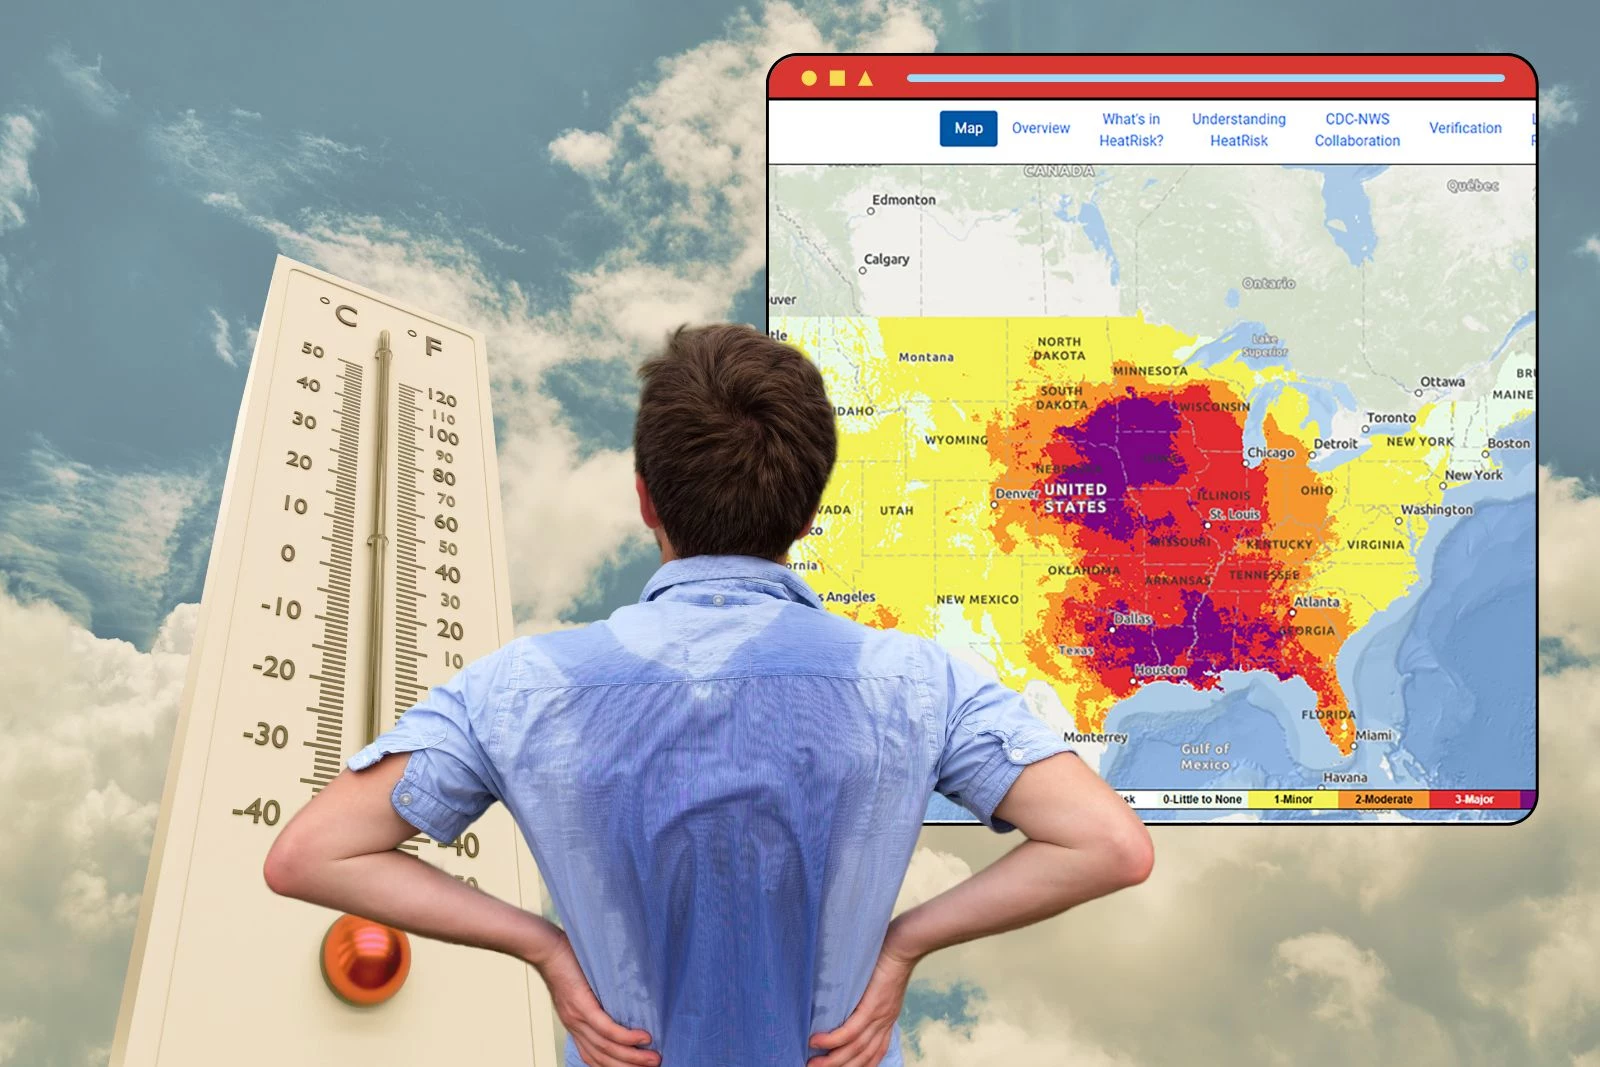 NWS Launches 'Heat Risk' Tool Following Hottest Year on Record